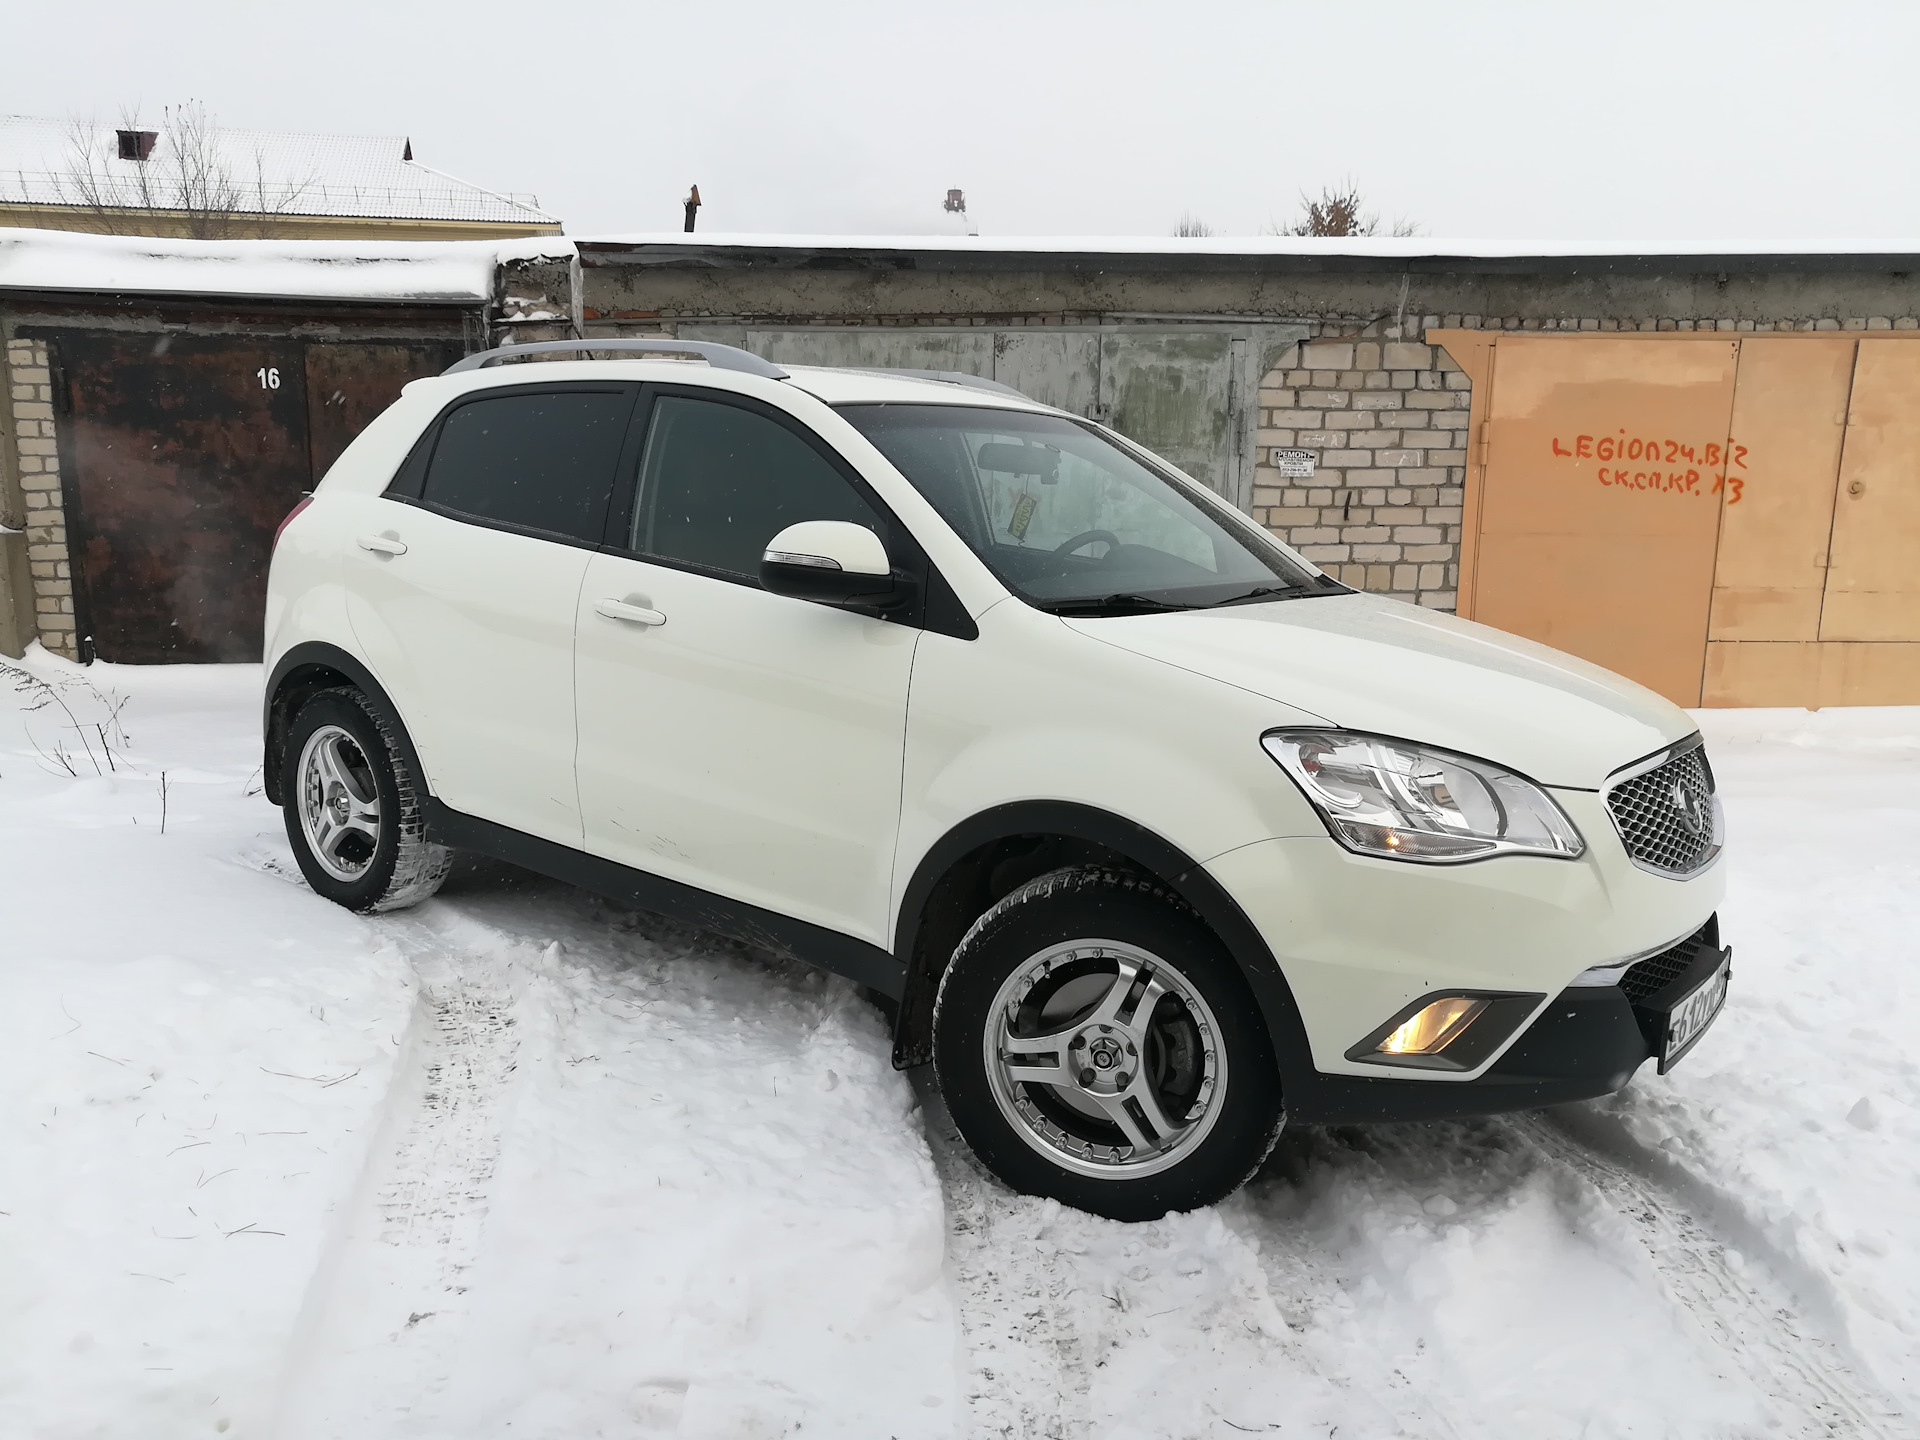 Ssangyong new actyon диски. SSANGYONG Actyon r17. SSANGYONG Actyon r18. Саньенг Актион 2 диски. Санг енг Актион на 17 дисках.